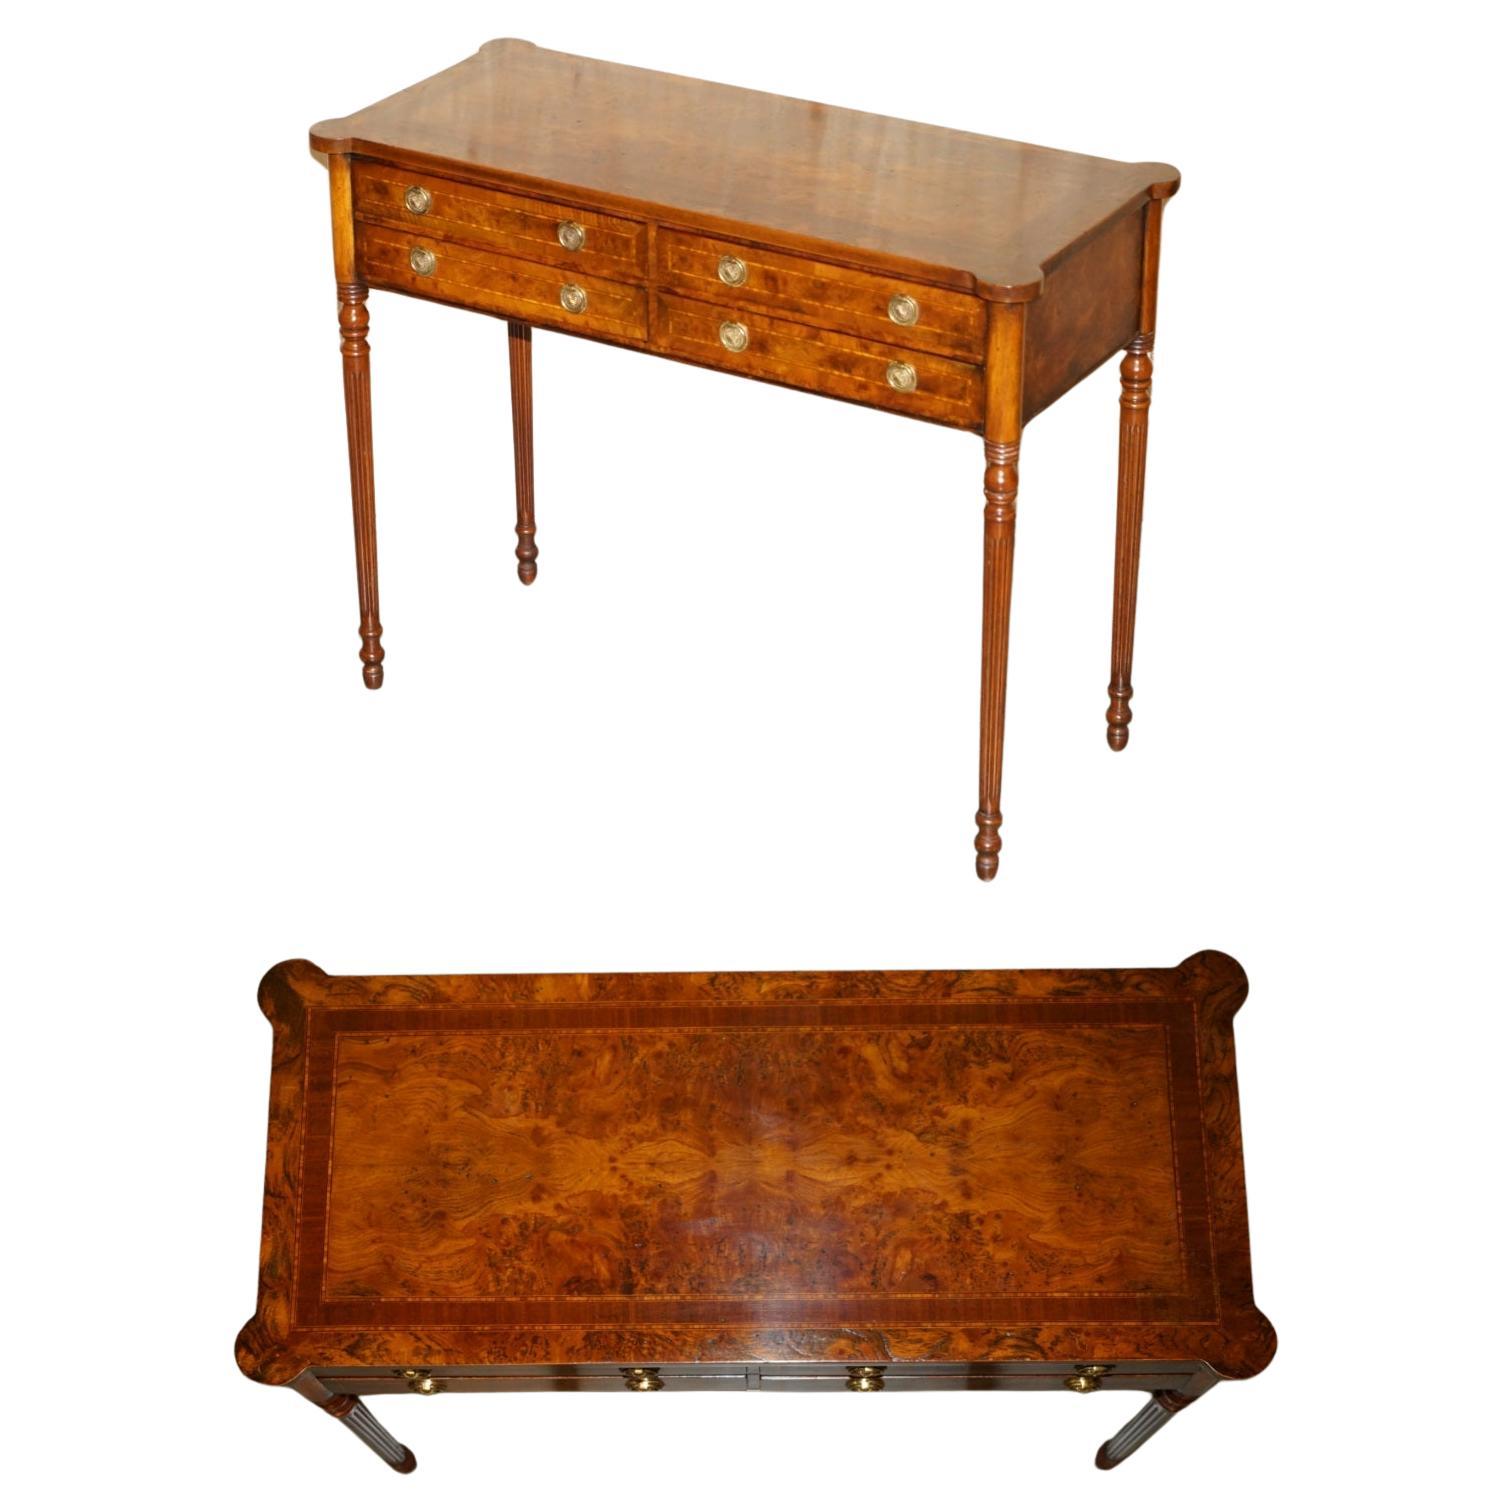 EXQUISITE CIRCA 1920 BURR ELM & SATiNWOOD FRENCH POLISHED RESTORED CONSOLE TABLE For Sale